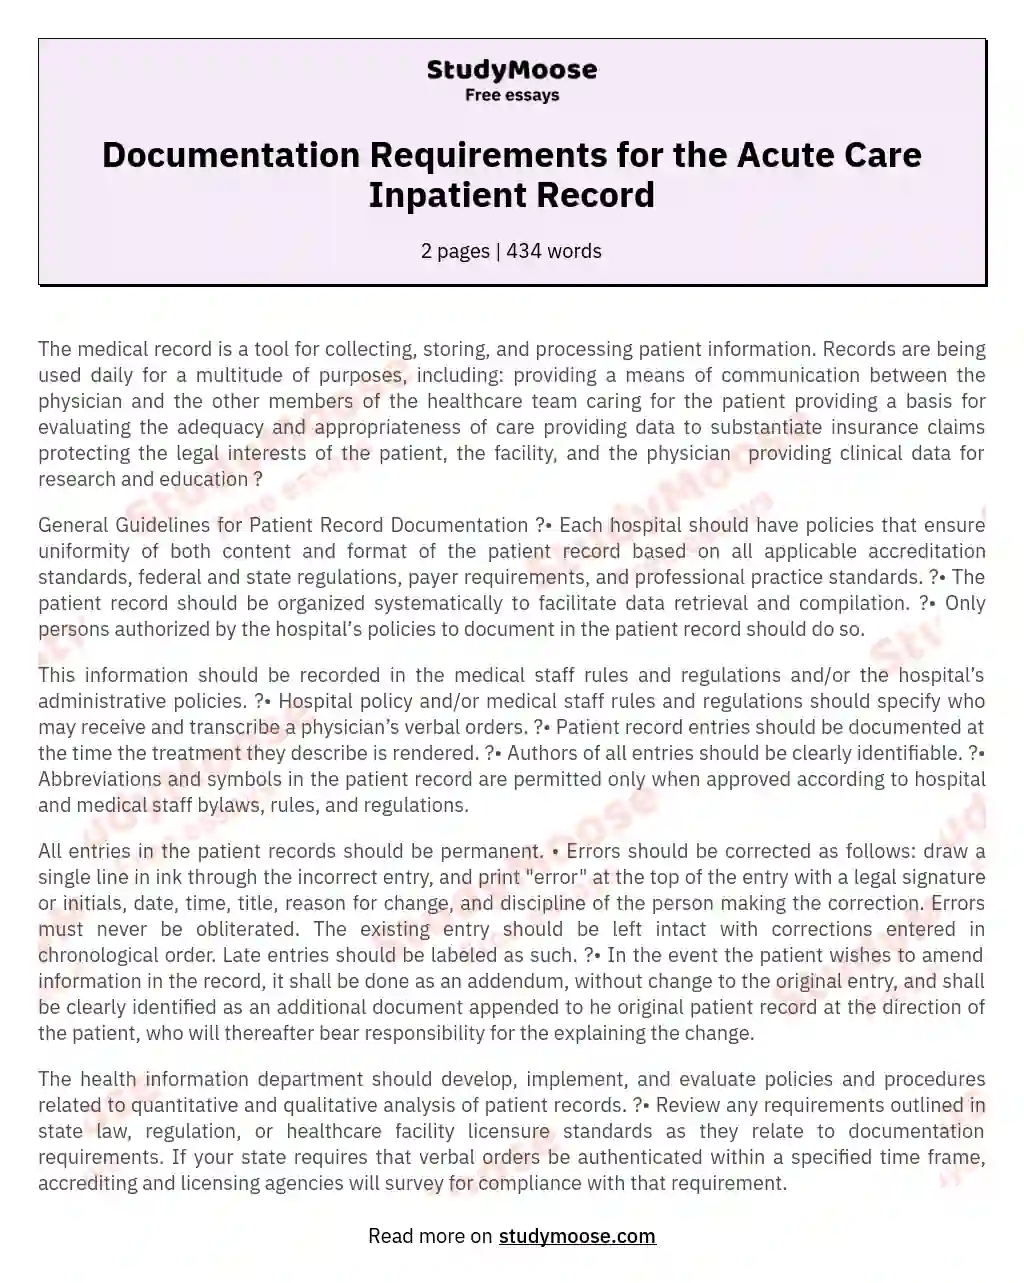 Documentation Requirements for the Acute Care Inpatient Record